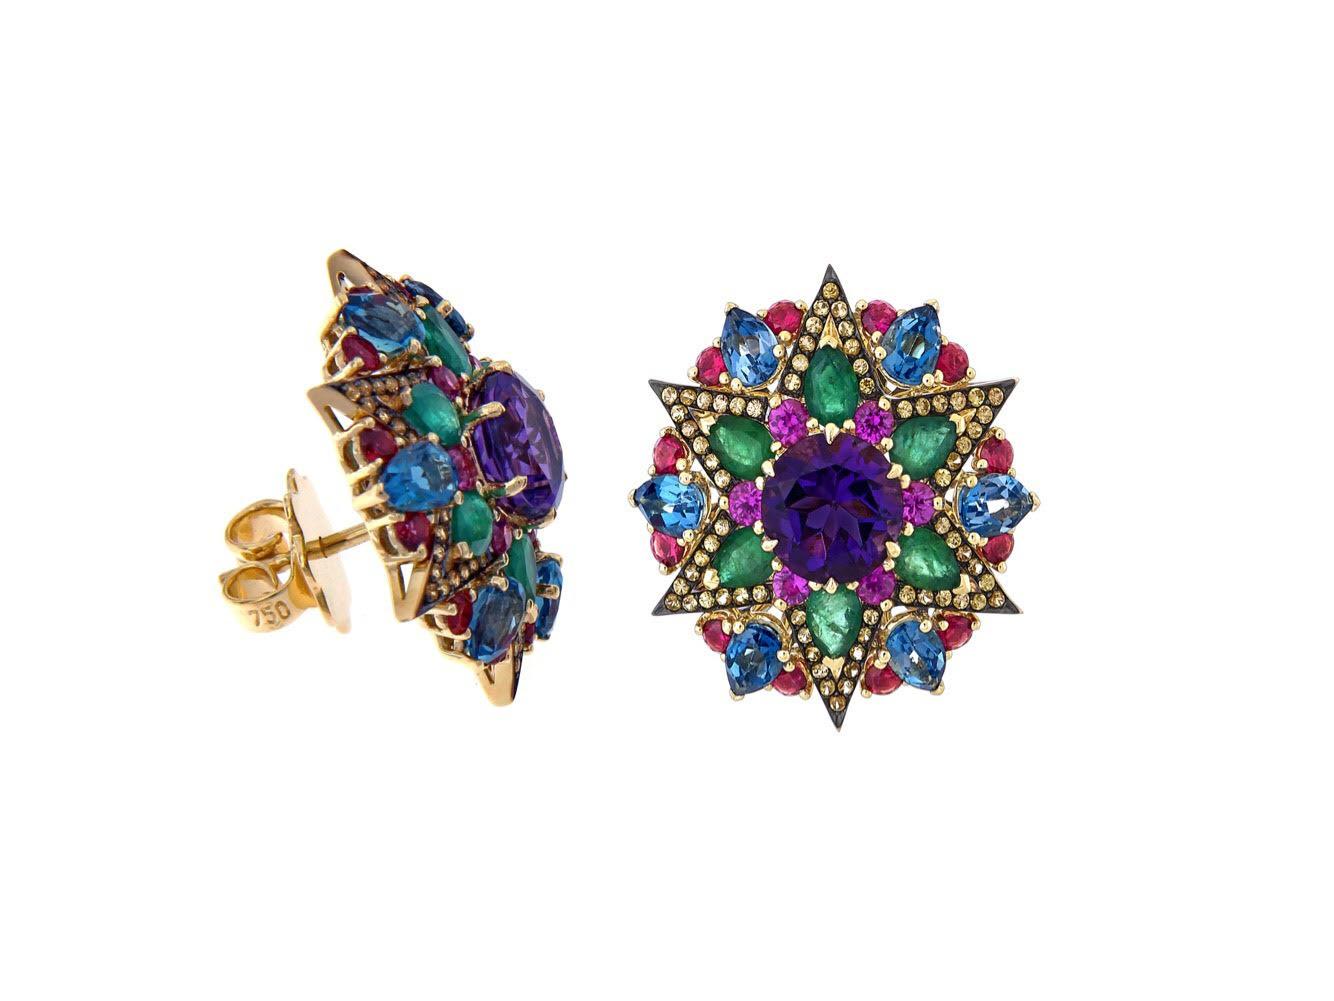 Round Cut 2.32 Carat Amethyst, Emerald and Multi-Colored Star Cluster Earrings